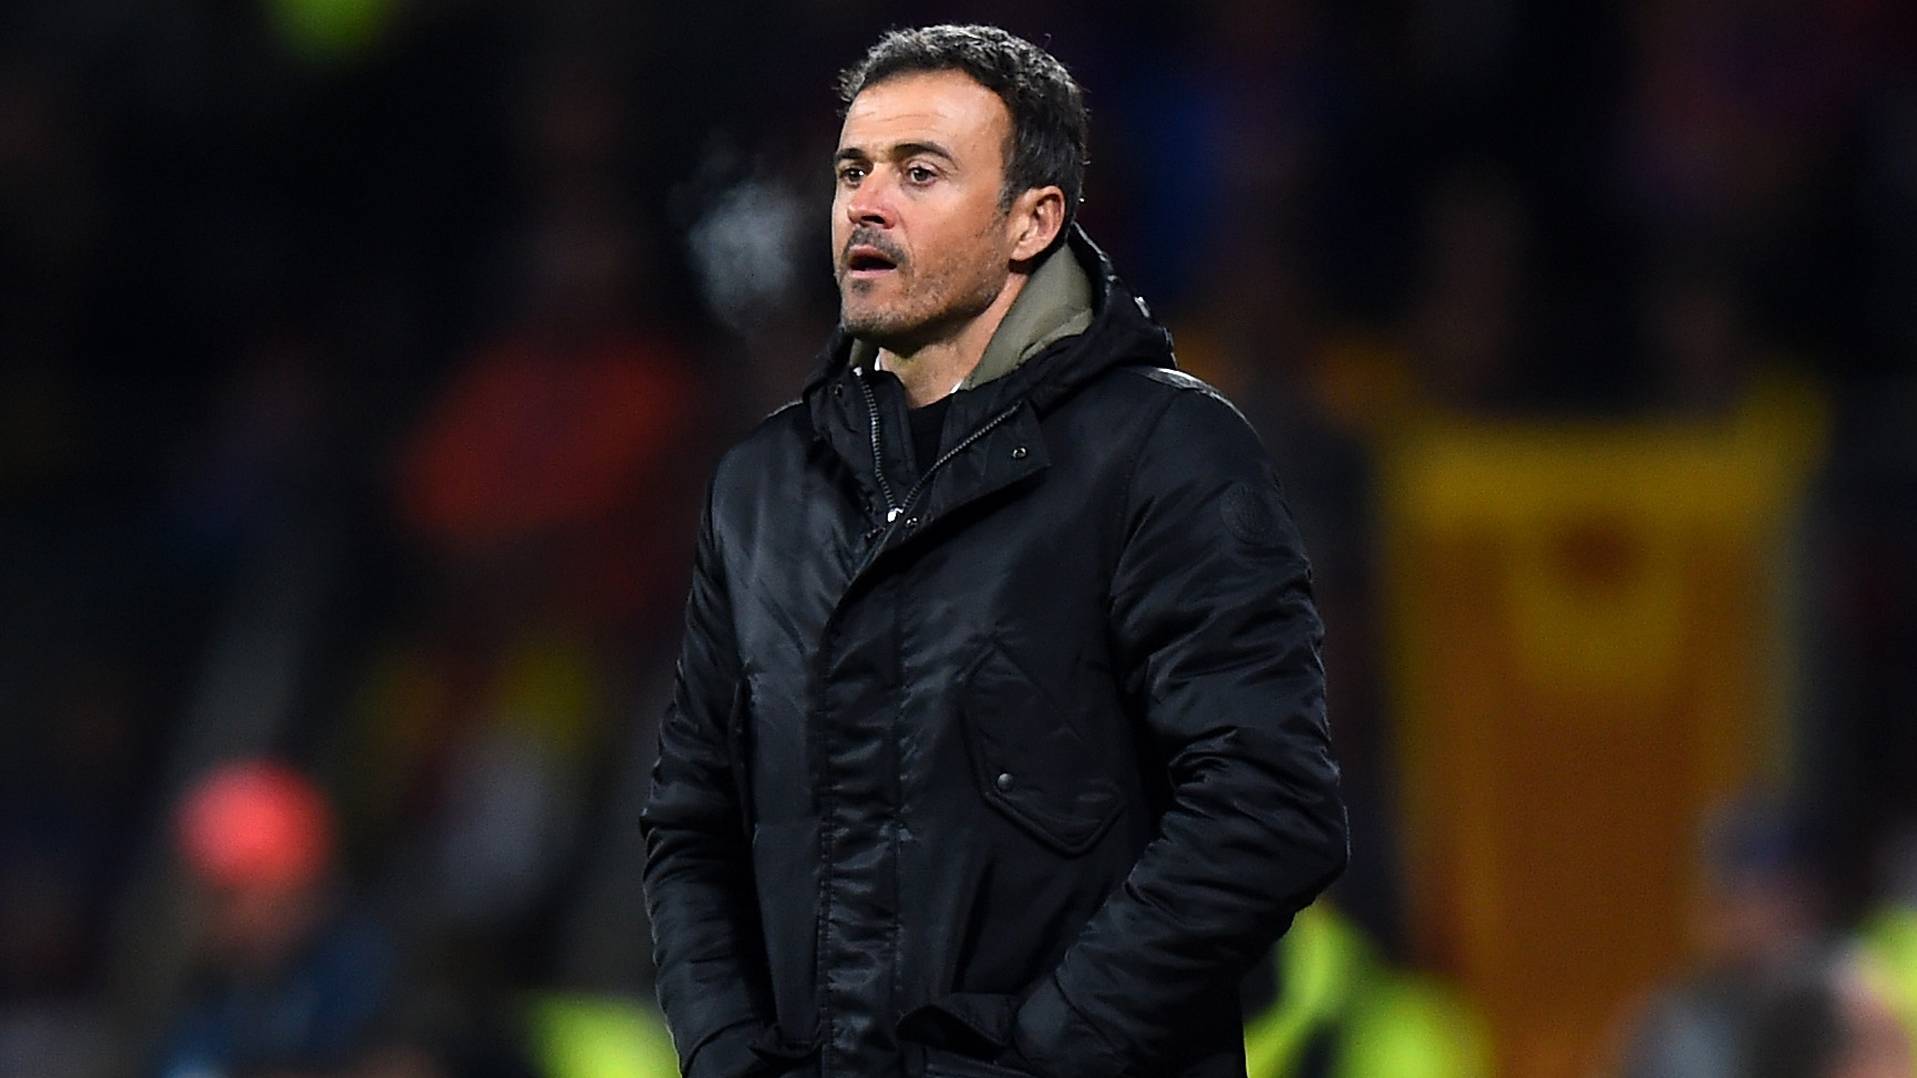 Luis Enrique bet by Mathieu for suplir to Hammered in front of the Arsenal